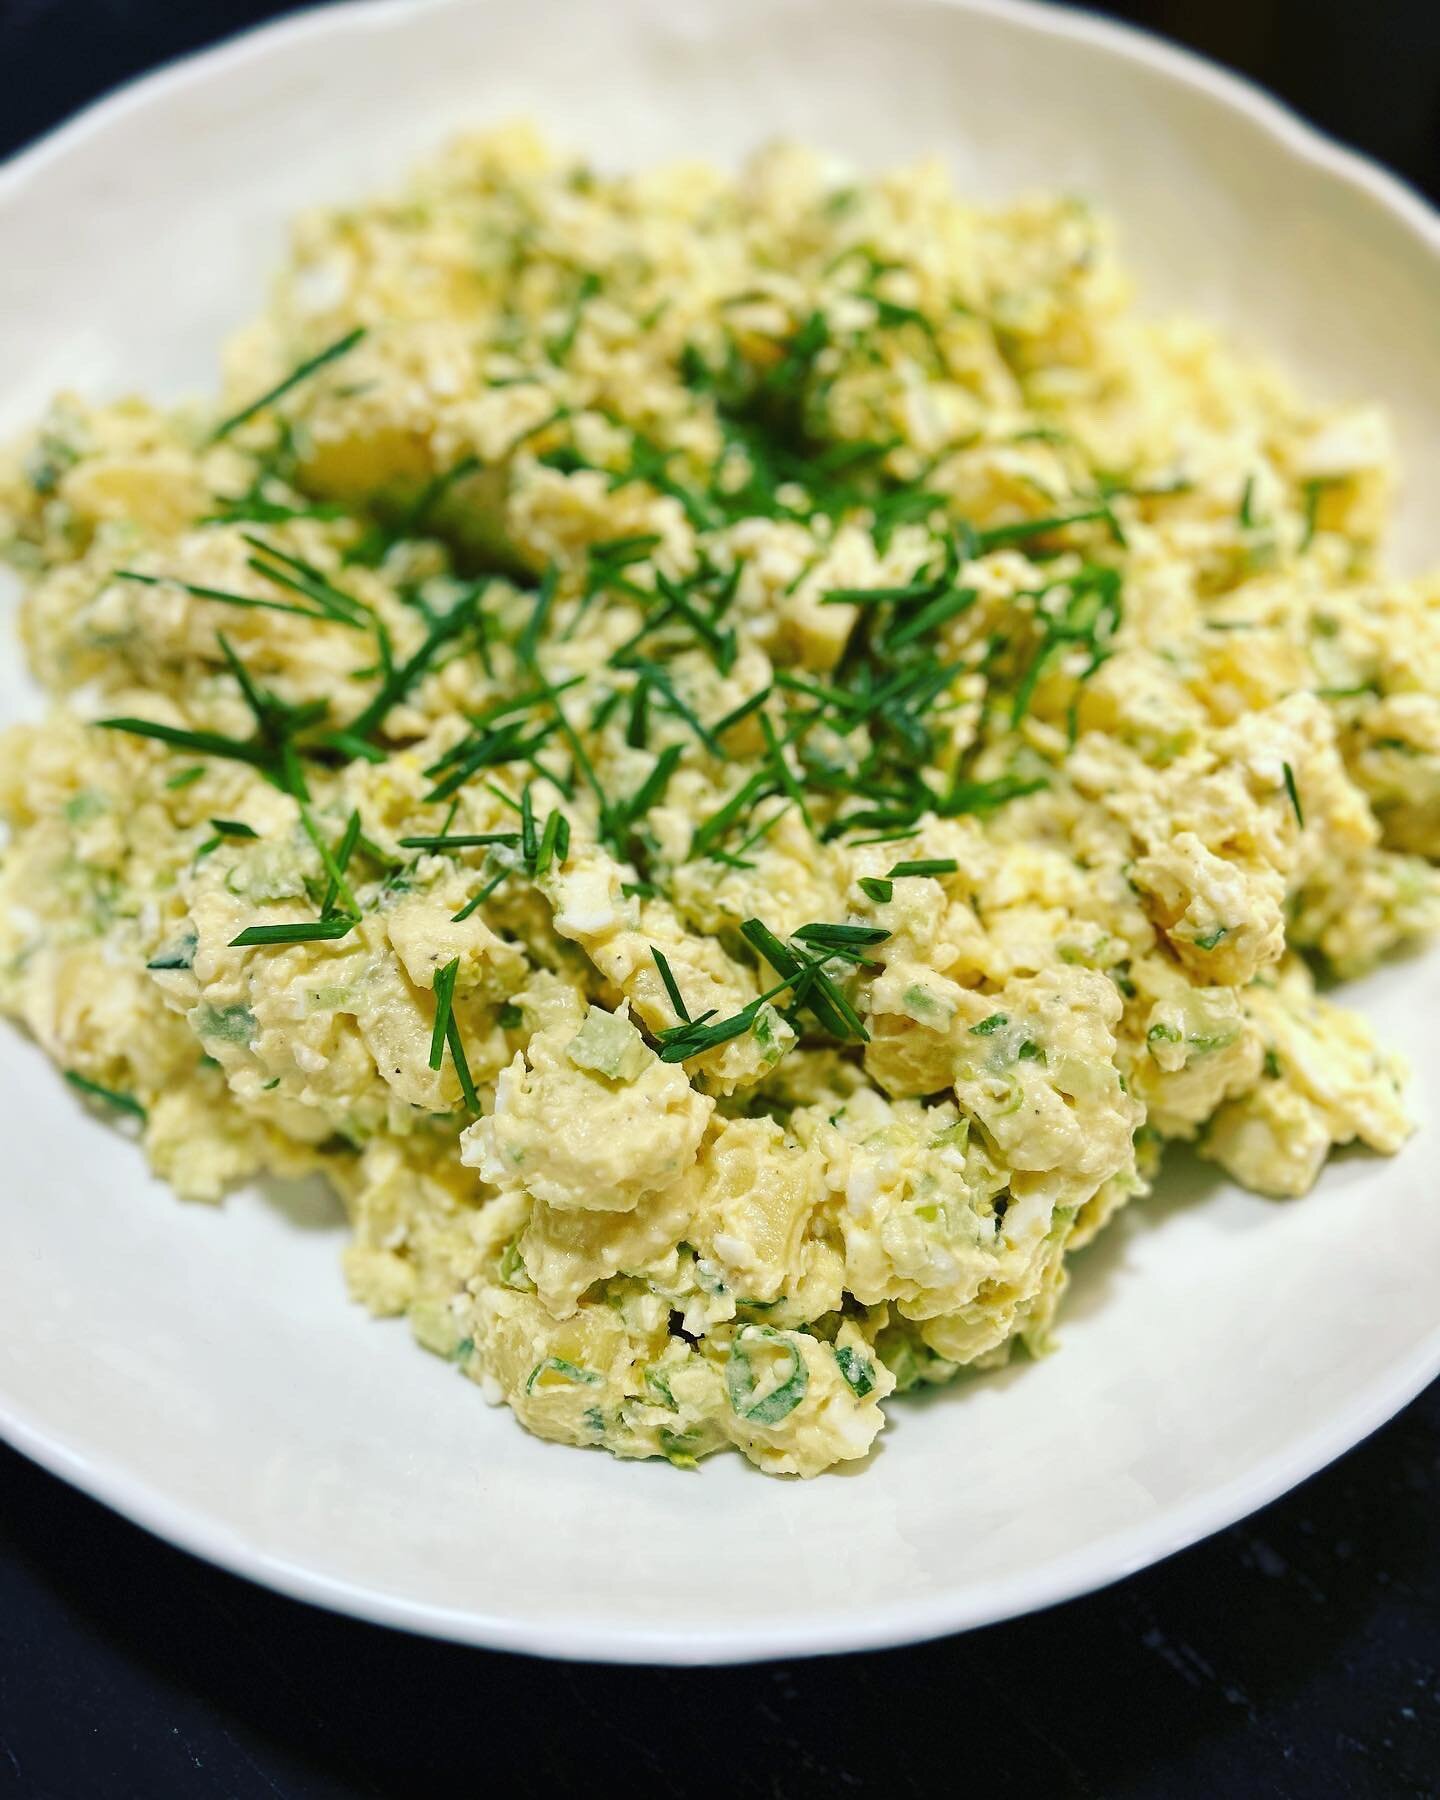 It&rsquo;s a potato salad kinda day!!! Summer grilling and chilling!! This potato salad has had a few rave reviews! It is a great combination of potatoes, eggs, celery and scallions in a mayonnaise dressing!!Place an order at www.elderberryprovisions